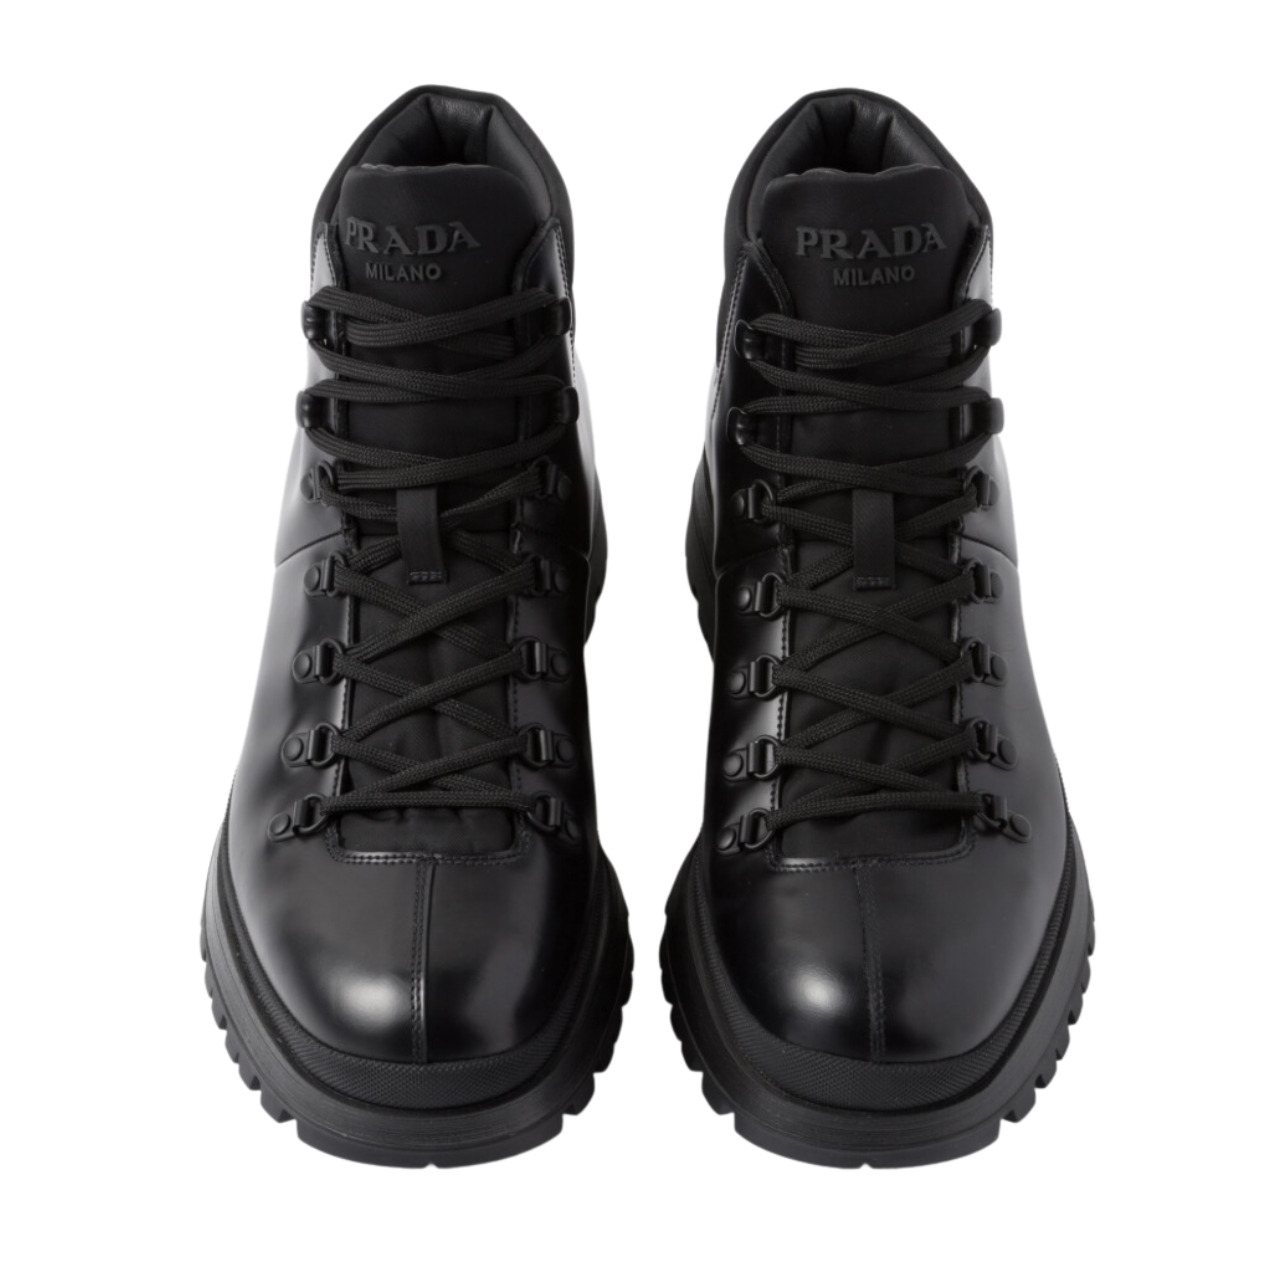 Prada black brushed leather and fabric booties